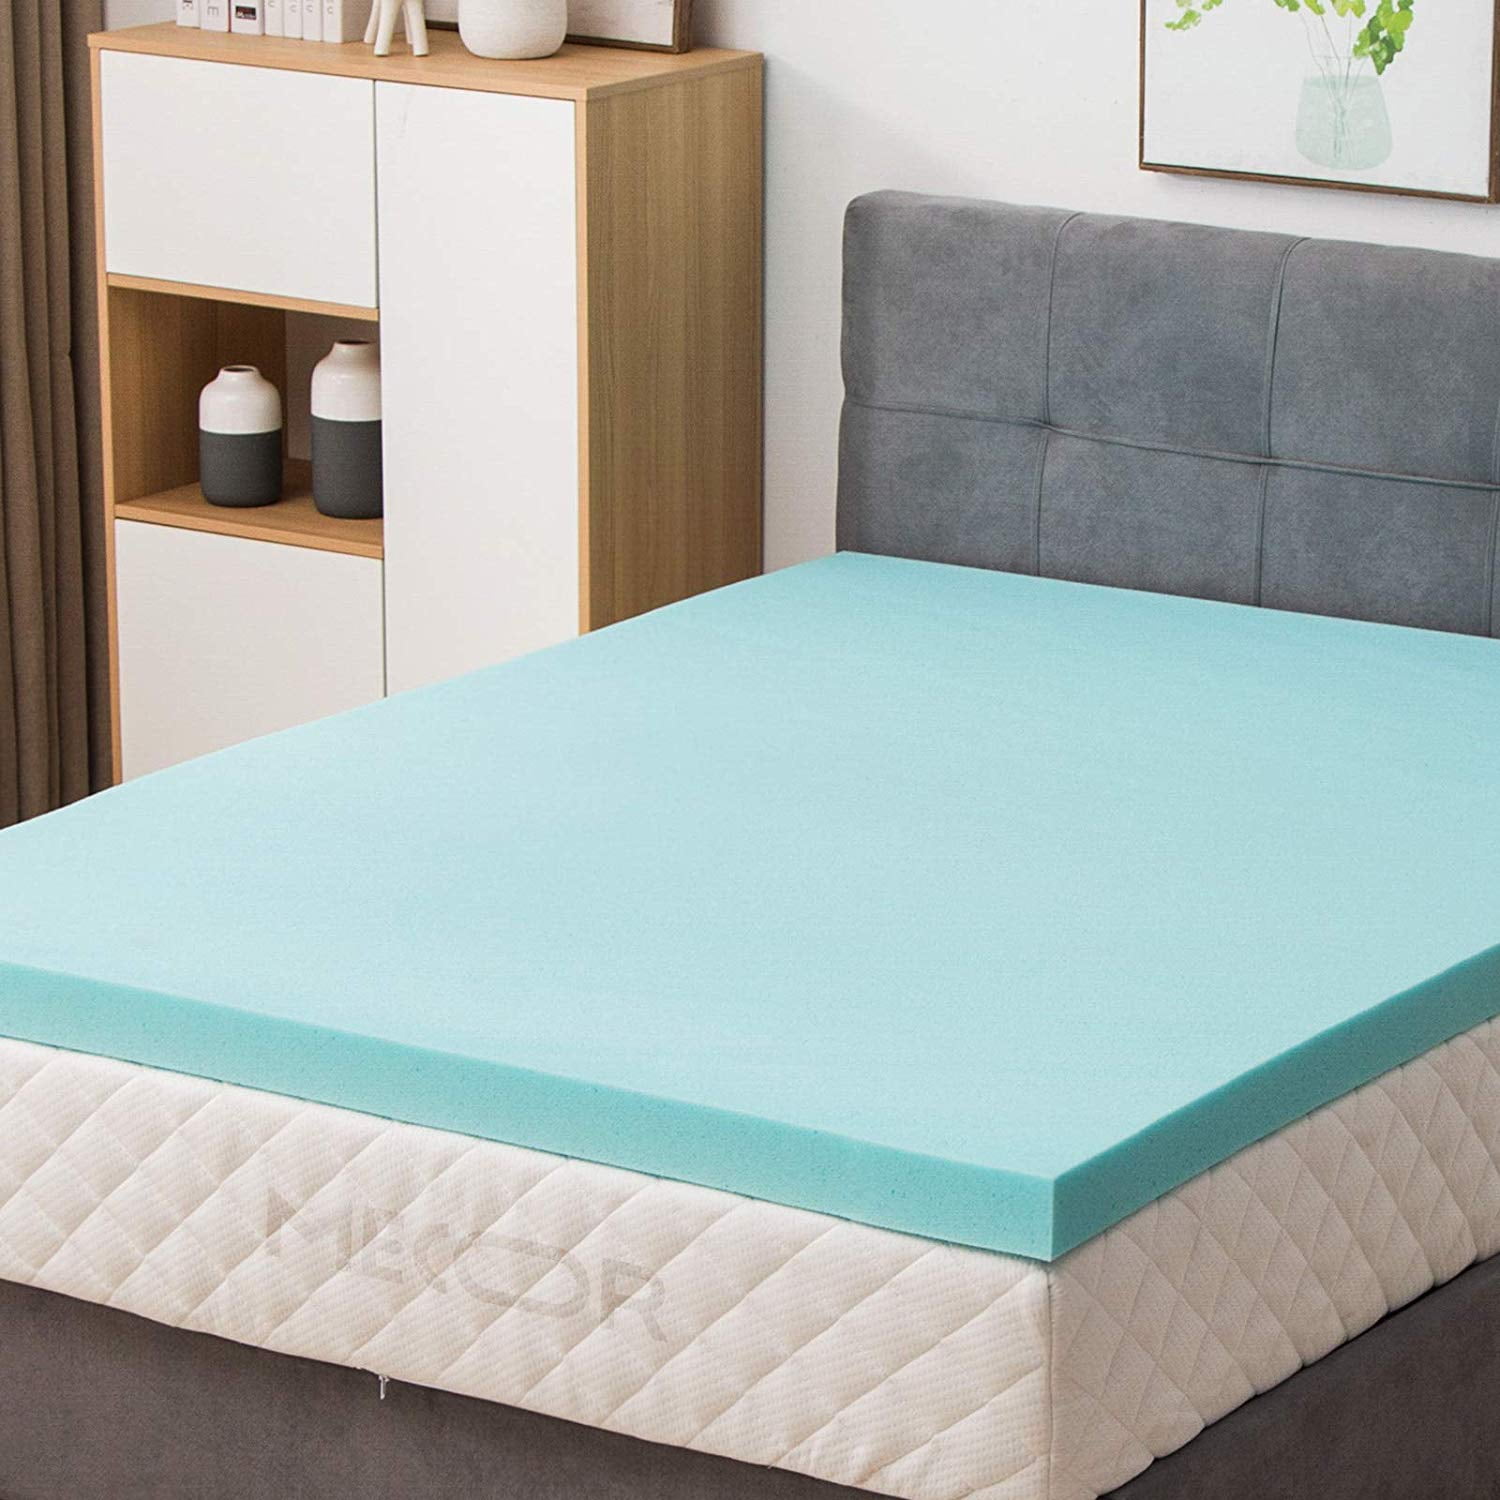 Mecor 4 4 Inch King Size Gel Infused Memory Foam Mattress Topper Flat Design Bed Mattress Topper For Side Back Stomach Sleepers Certipur Us Certified Blue Walmart Com